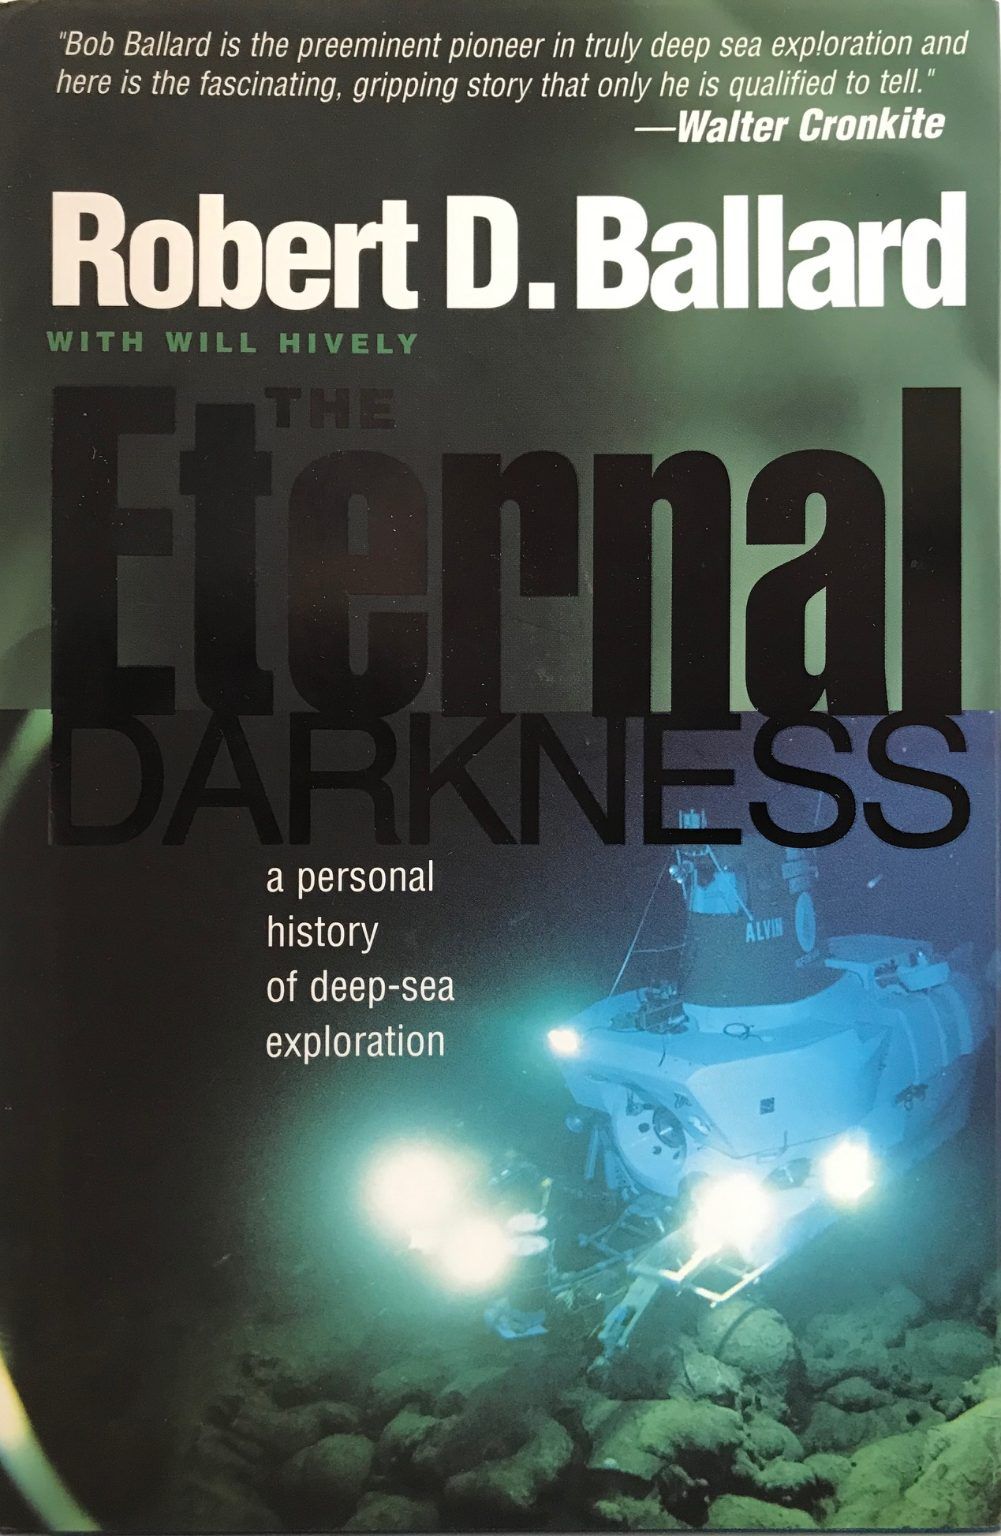 THE ETERNAL DARKNESS: A Personal History of Deep-Sea Exploration